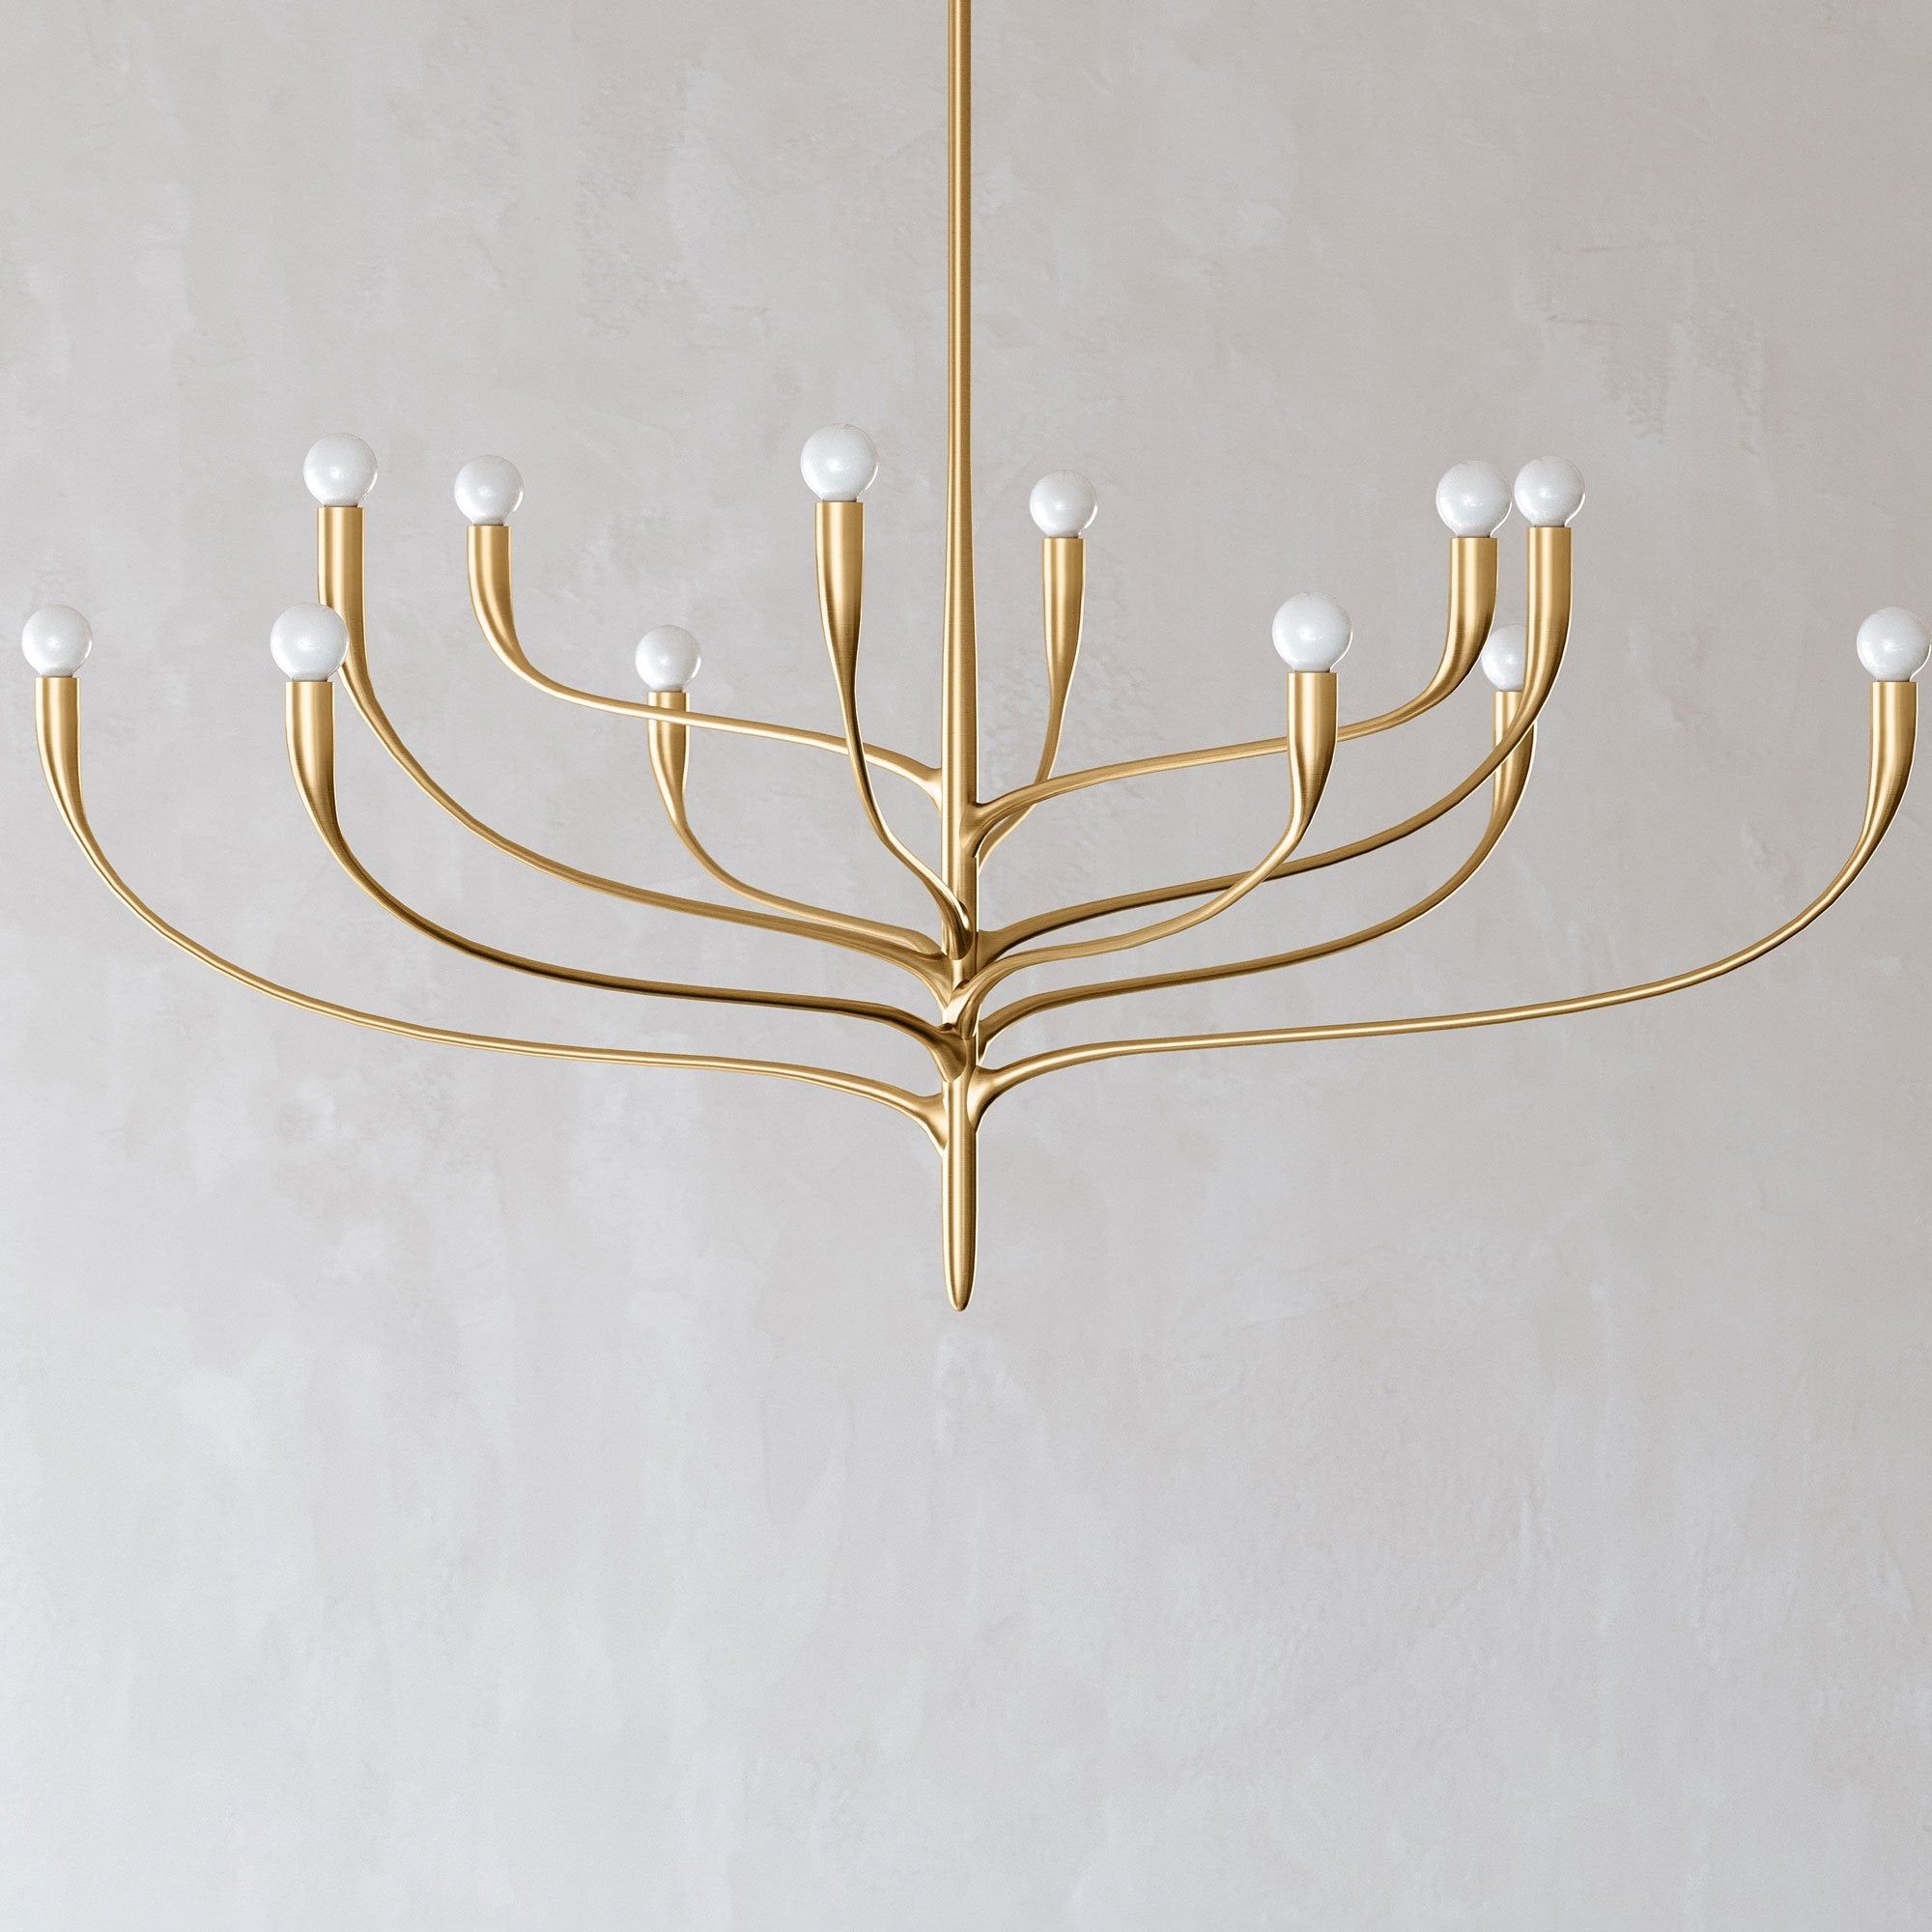 6 Chandeliers Glamorous Lighting Options for Your Home Décor